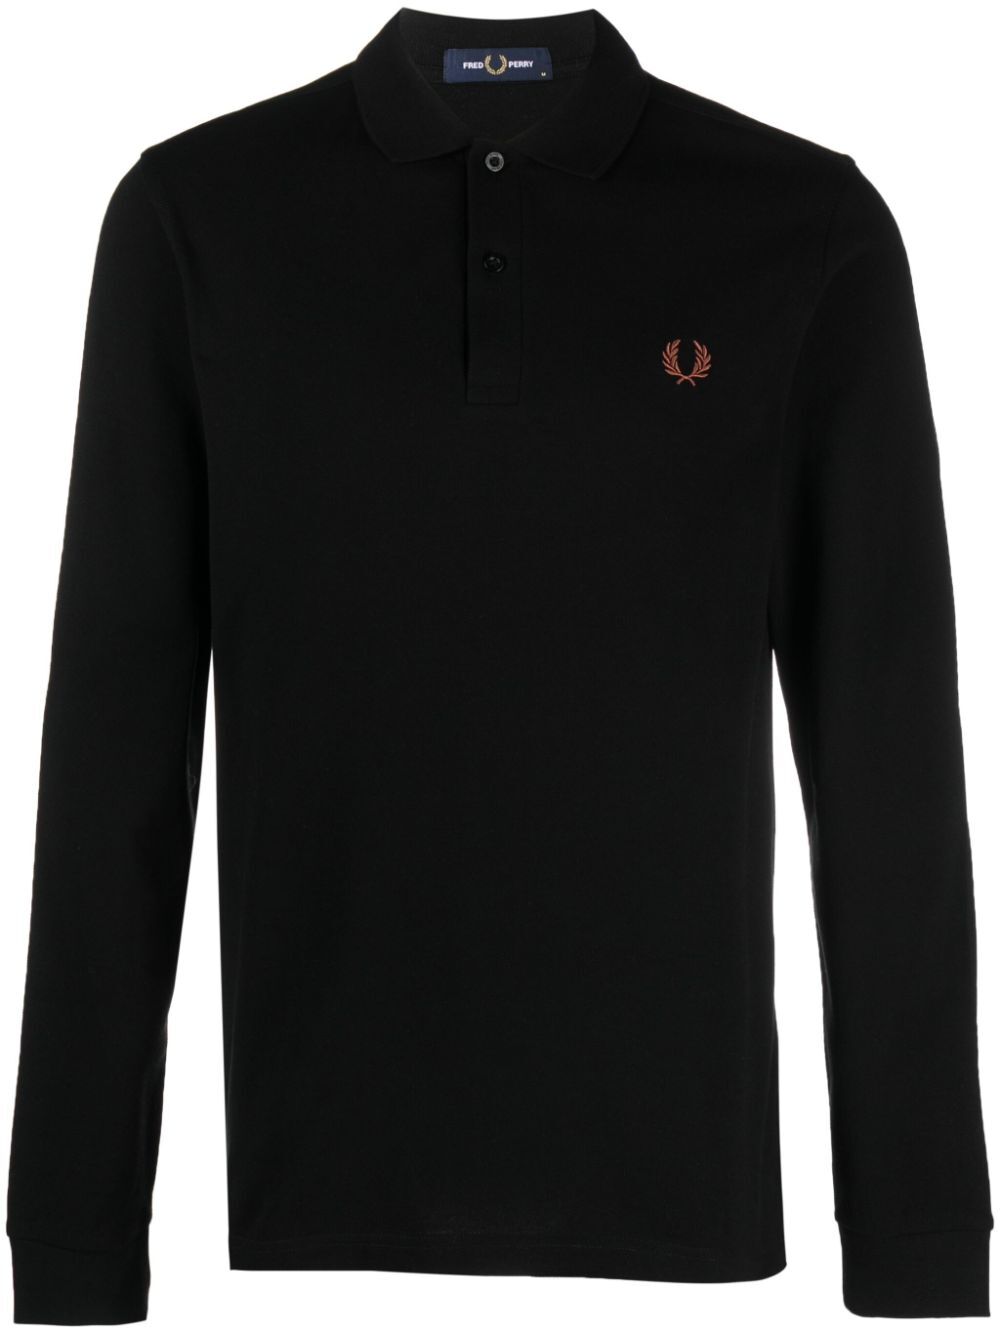 FRED PERRY FP LONG SLEEVE PLAIN FRED PERRY SHIRT,M6006 093